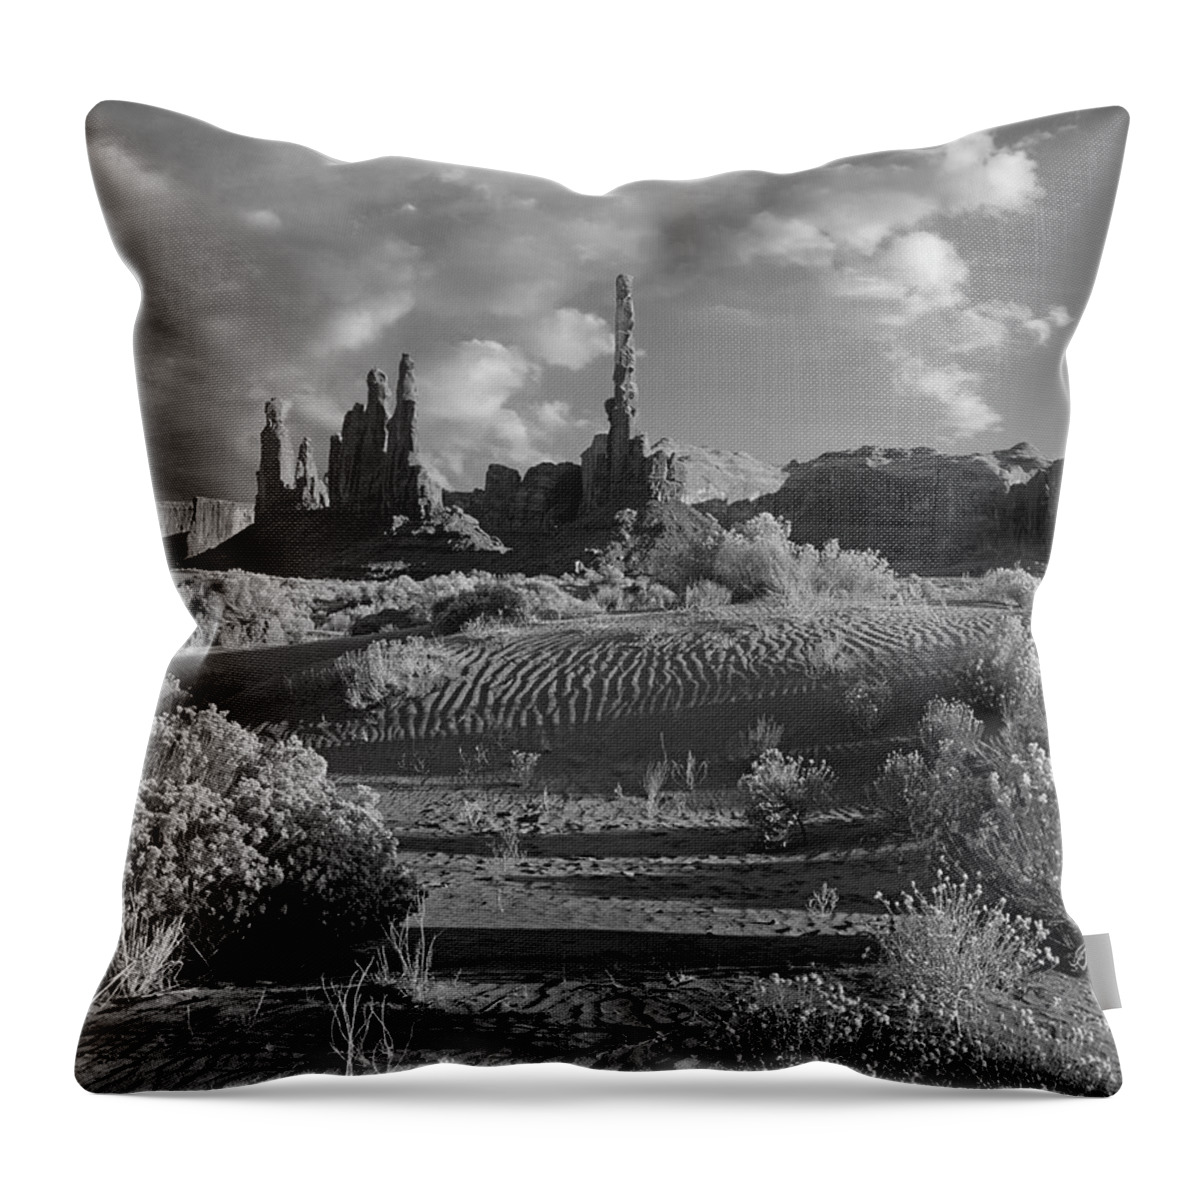 Disk1216 Throw Pillow featuring the photograph Monument Valley, Arizona by Tim Fitzharris